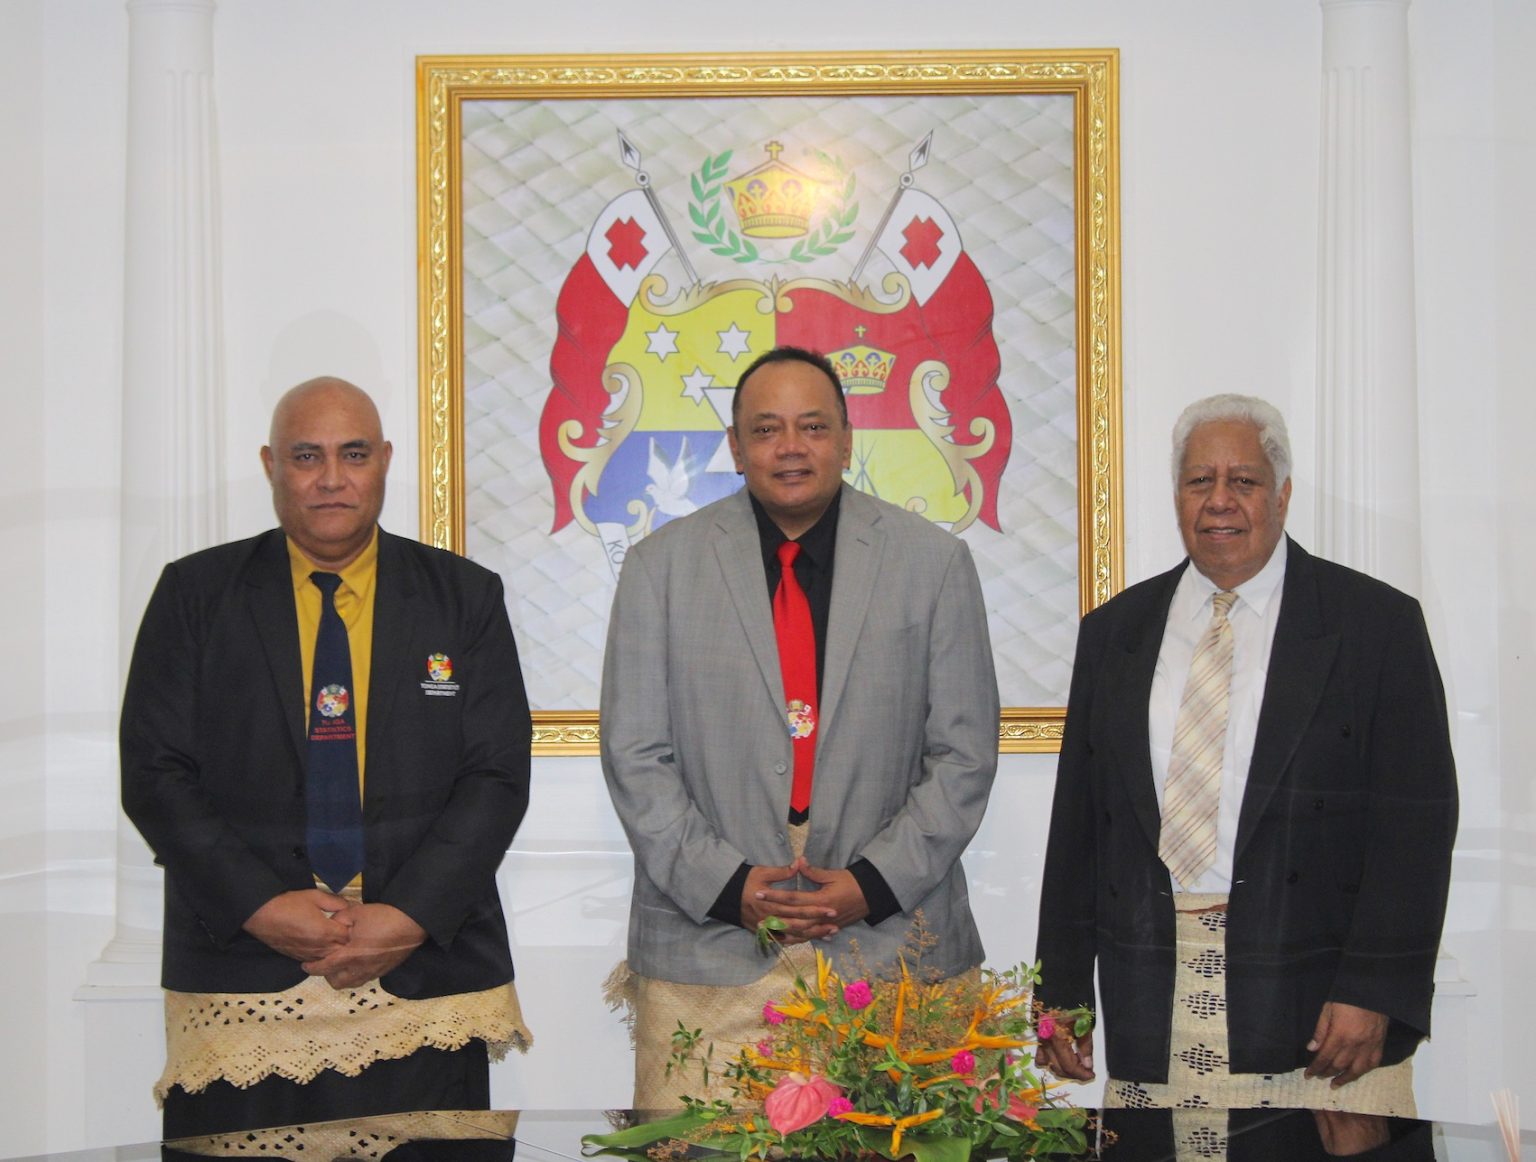 Mr Sione Fo’i’akau Lolohea appointed as new Government Statistician ...